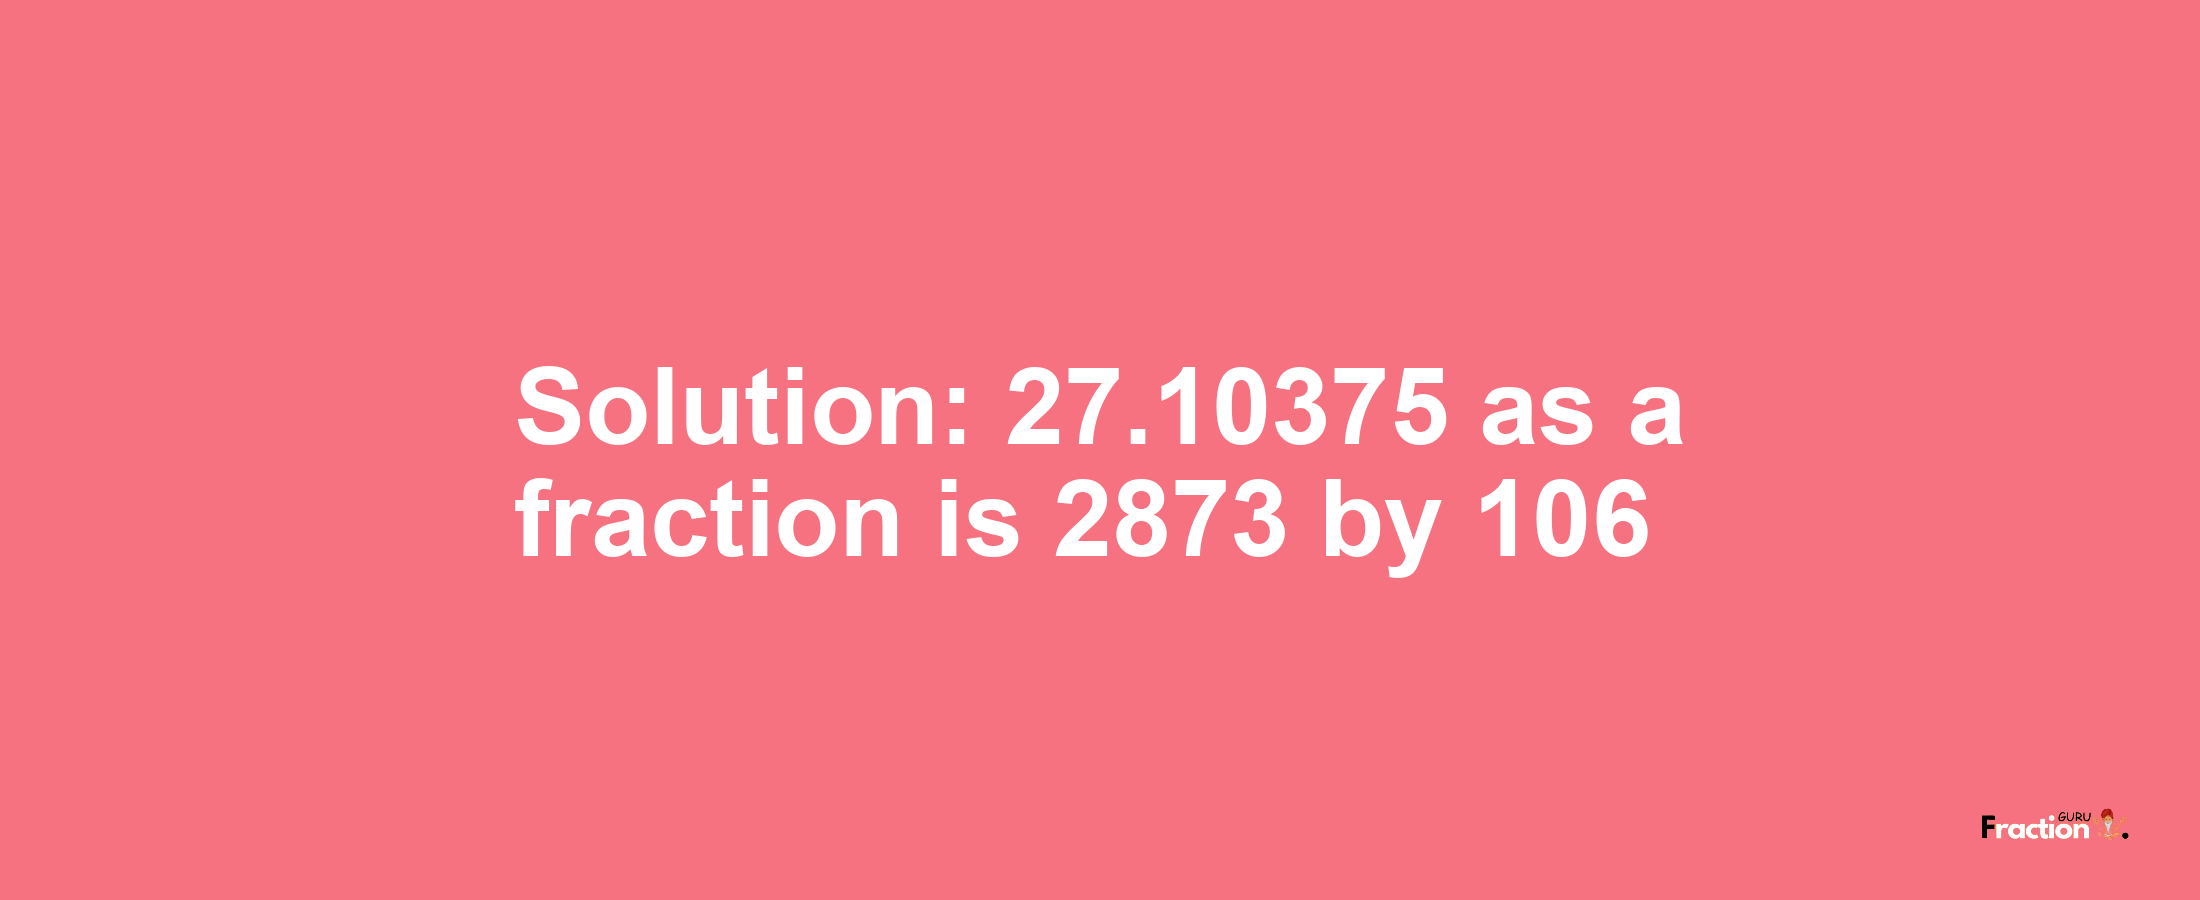 Solution:27.10375 as a fraction is 2873/106